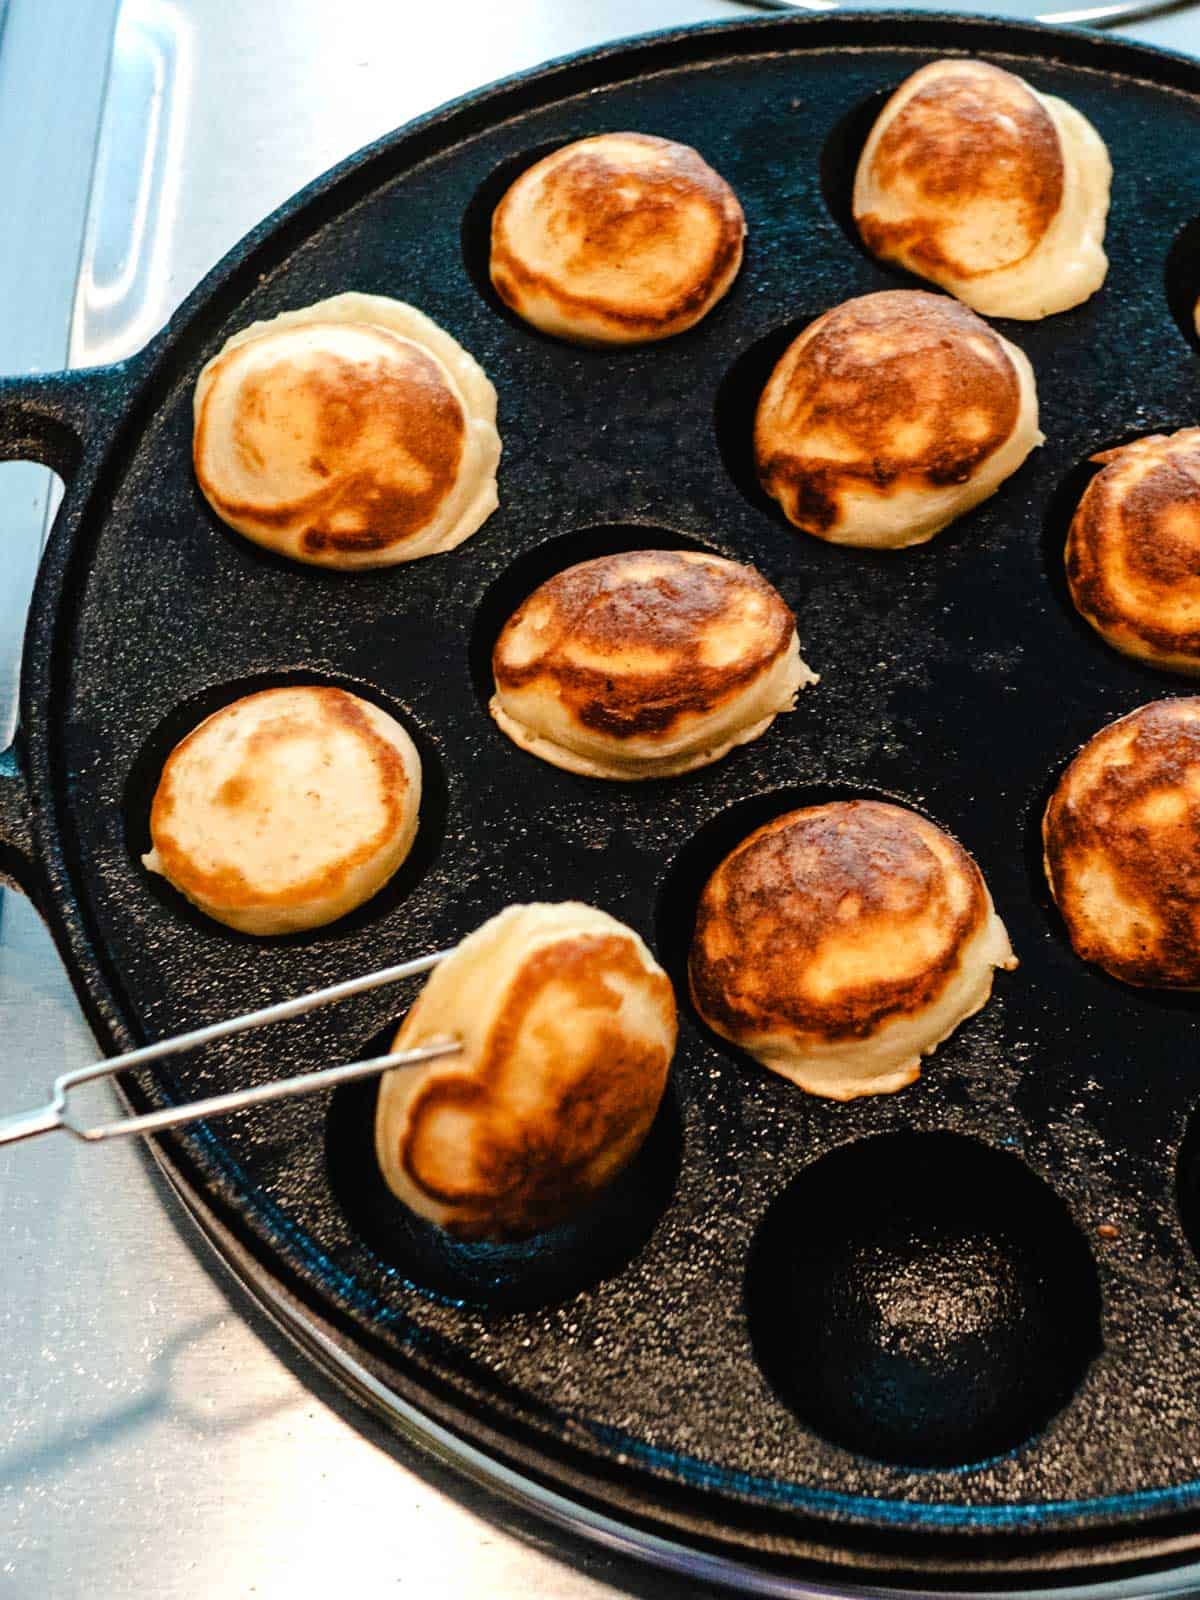 Removing the Poffertjes from the pan.